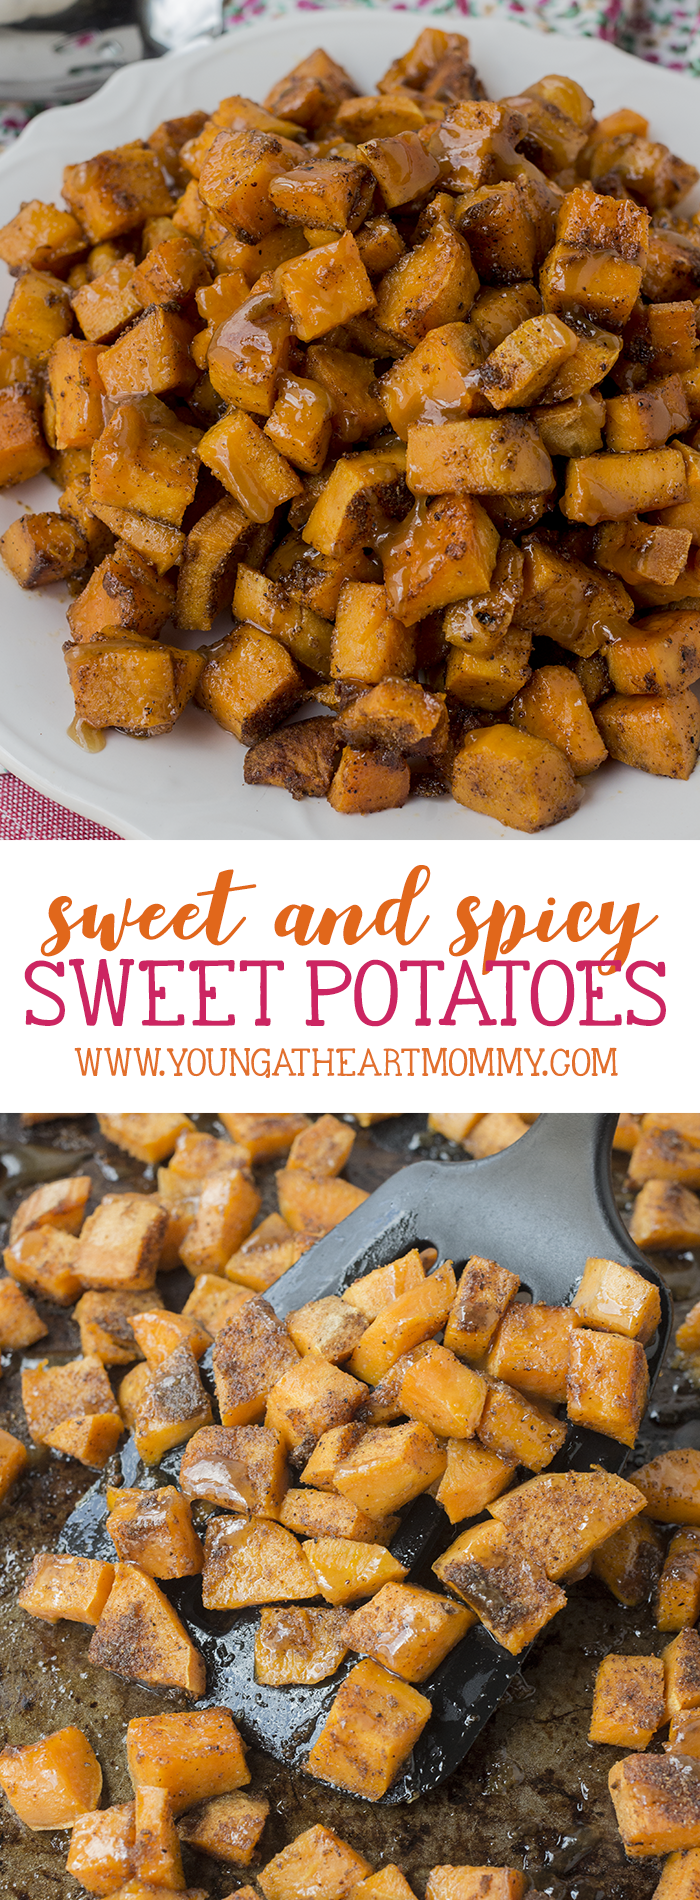 Sweet And Spicy Roasted Sweet Potatoes